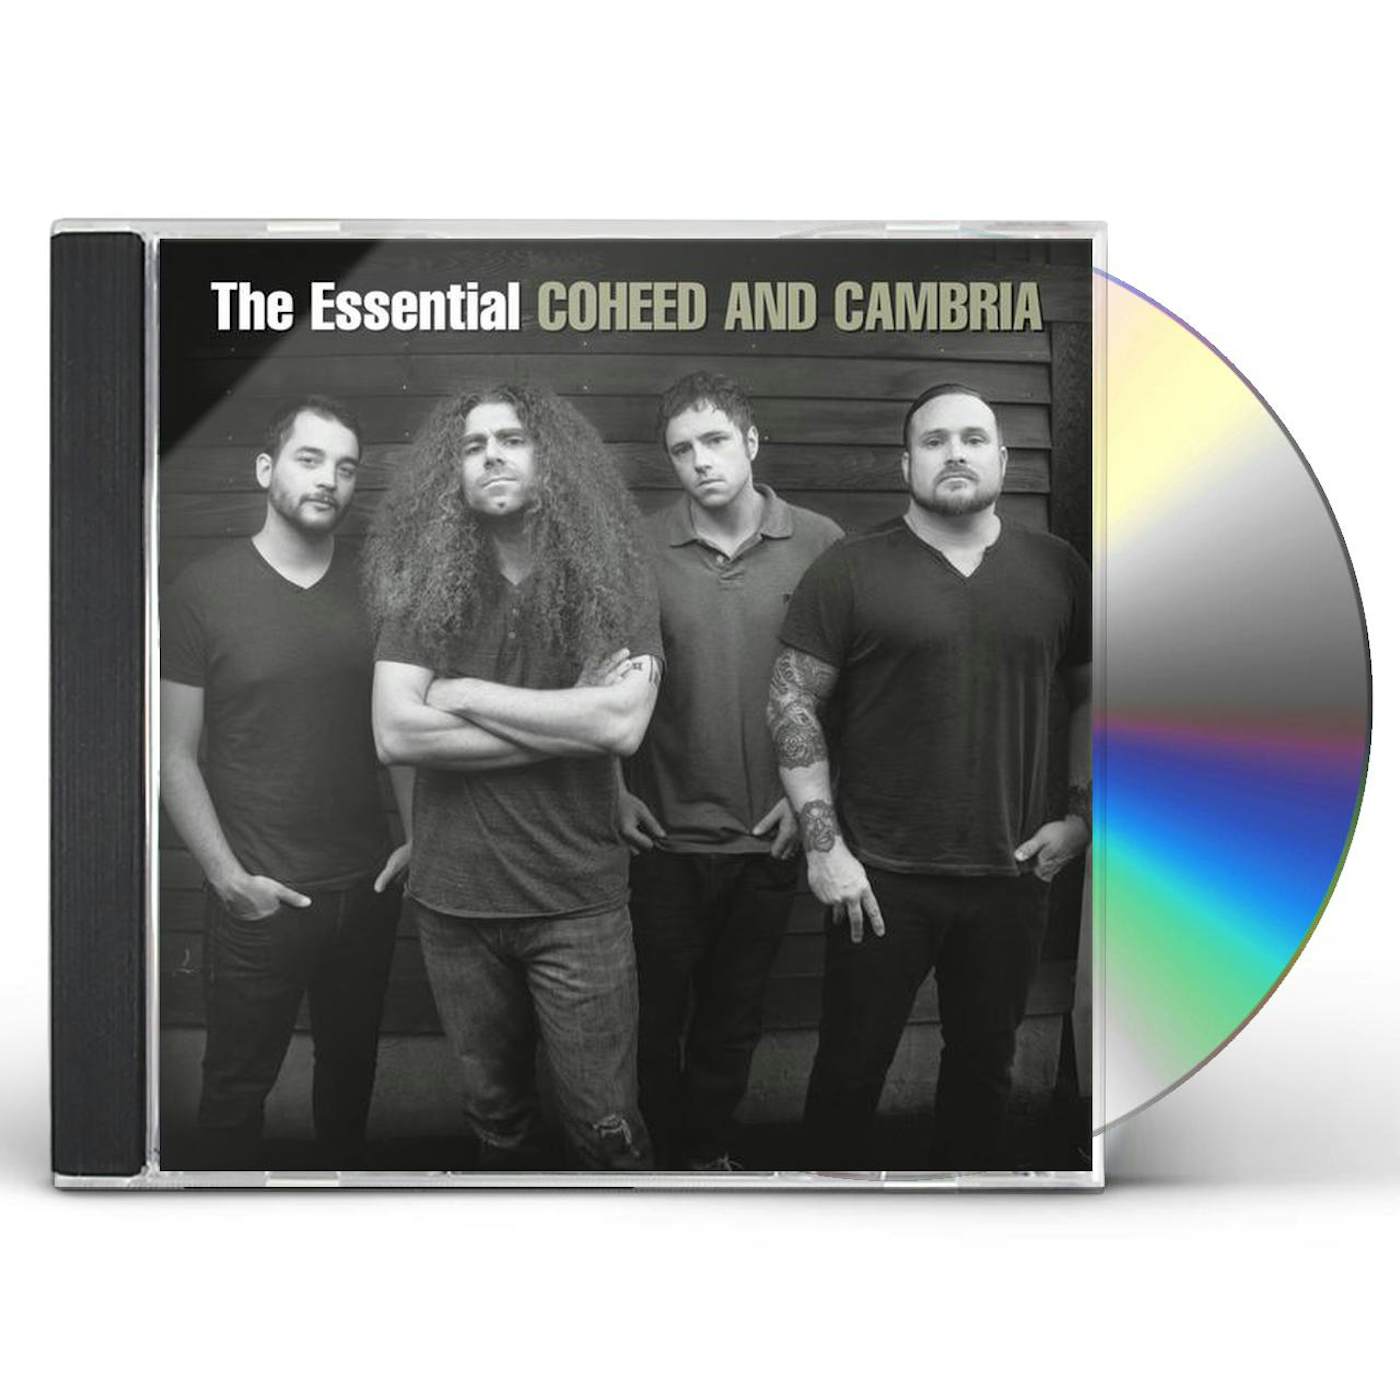 ESSENTIAL Coheed and Cambria CD